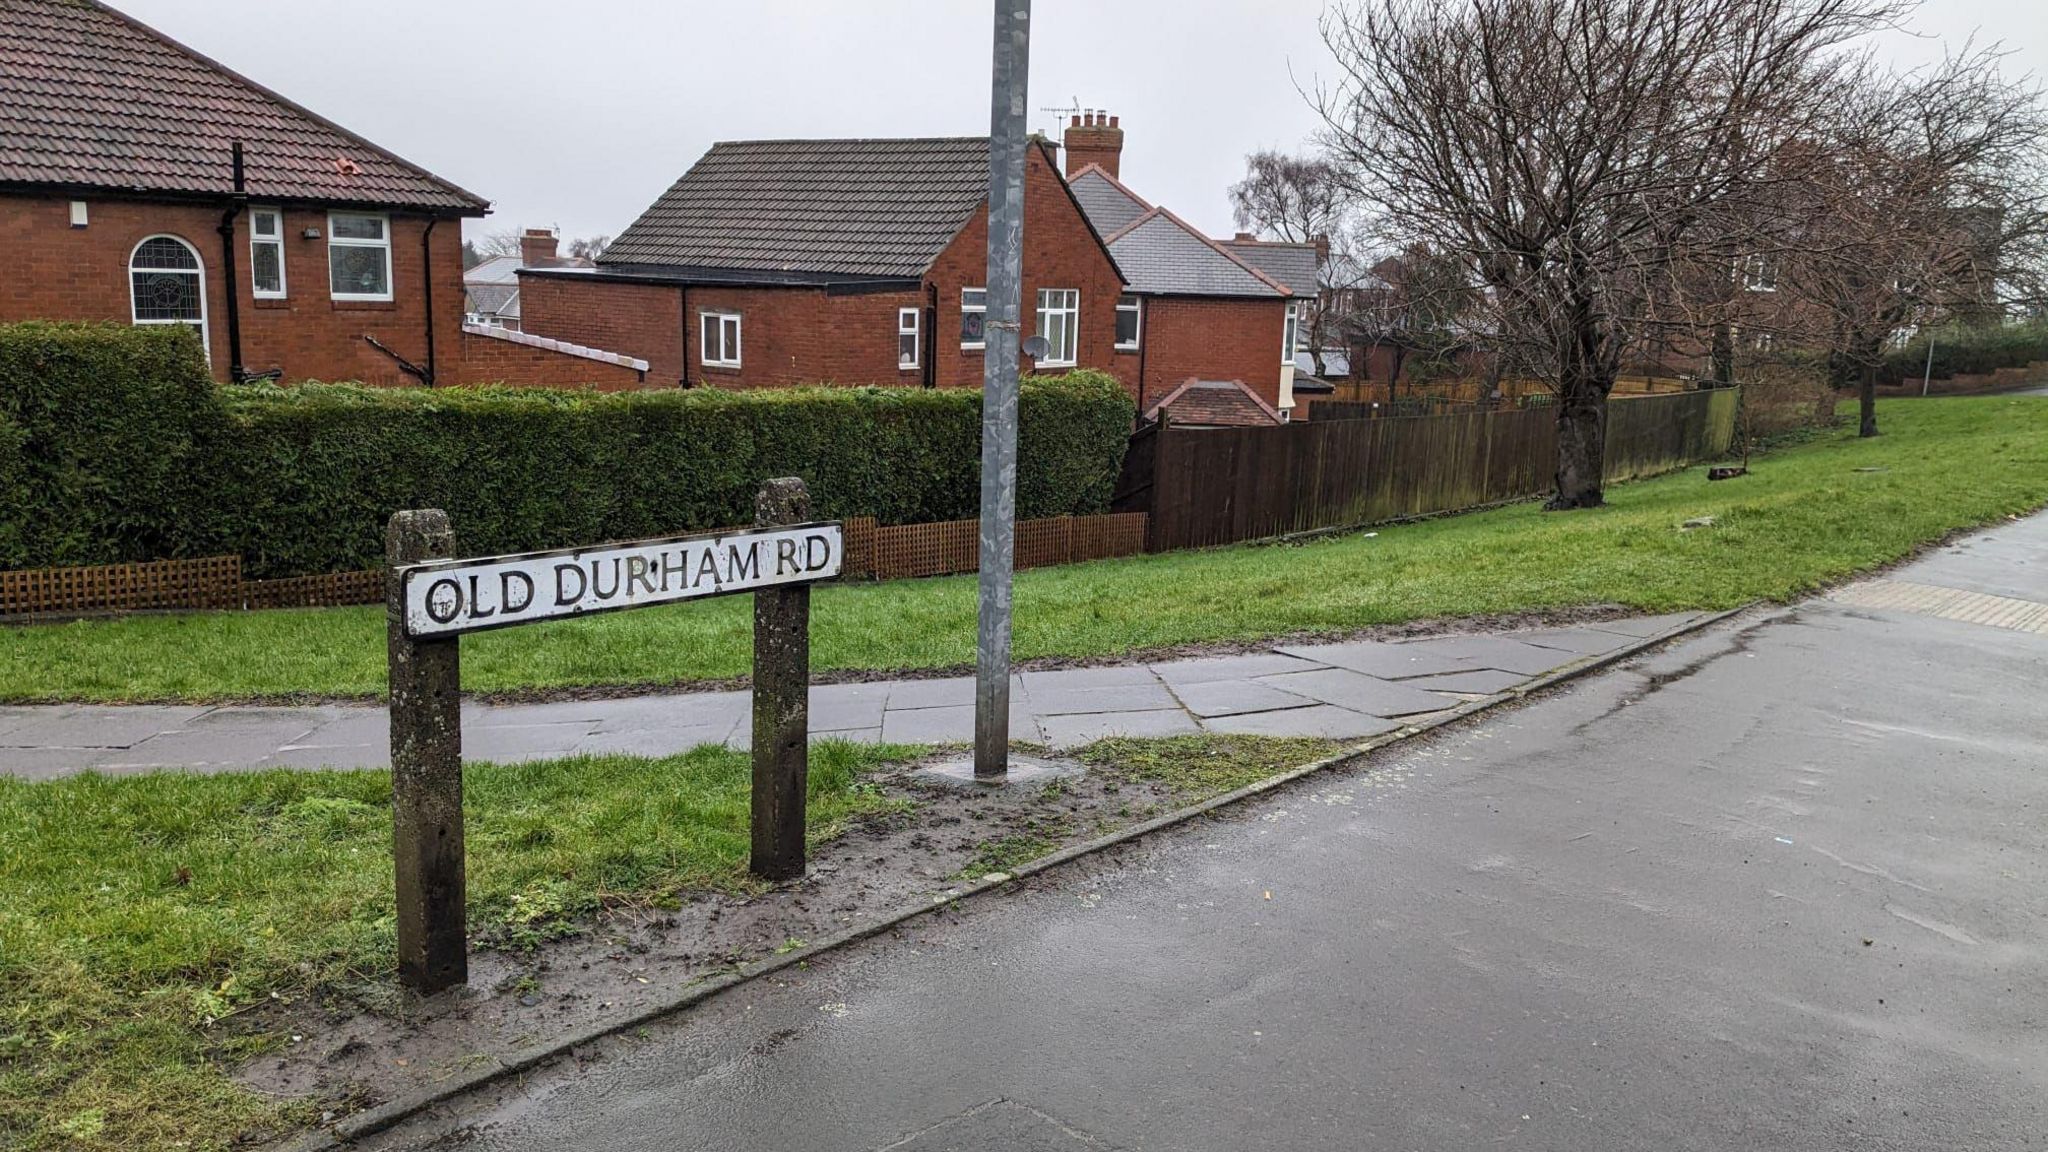 The burglars targeted a home on Old Durham Road in Gateshead